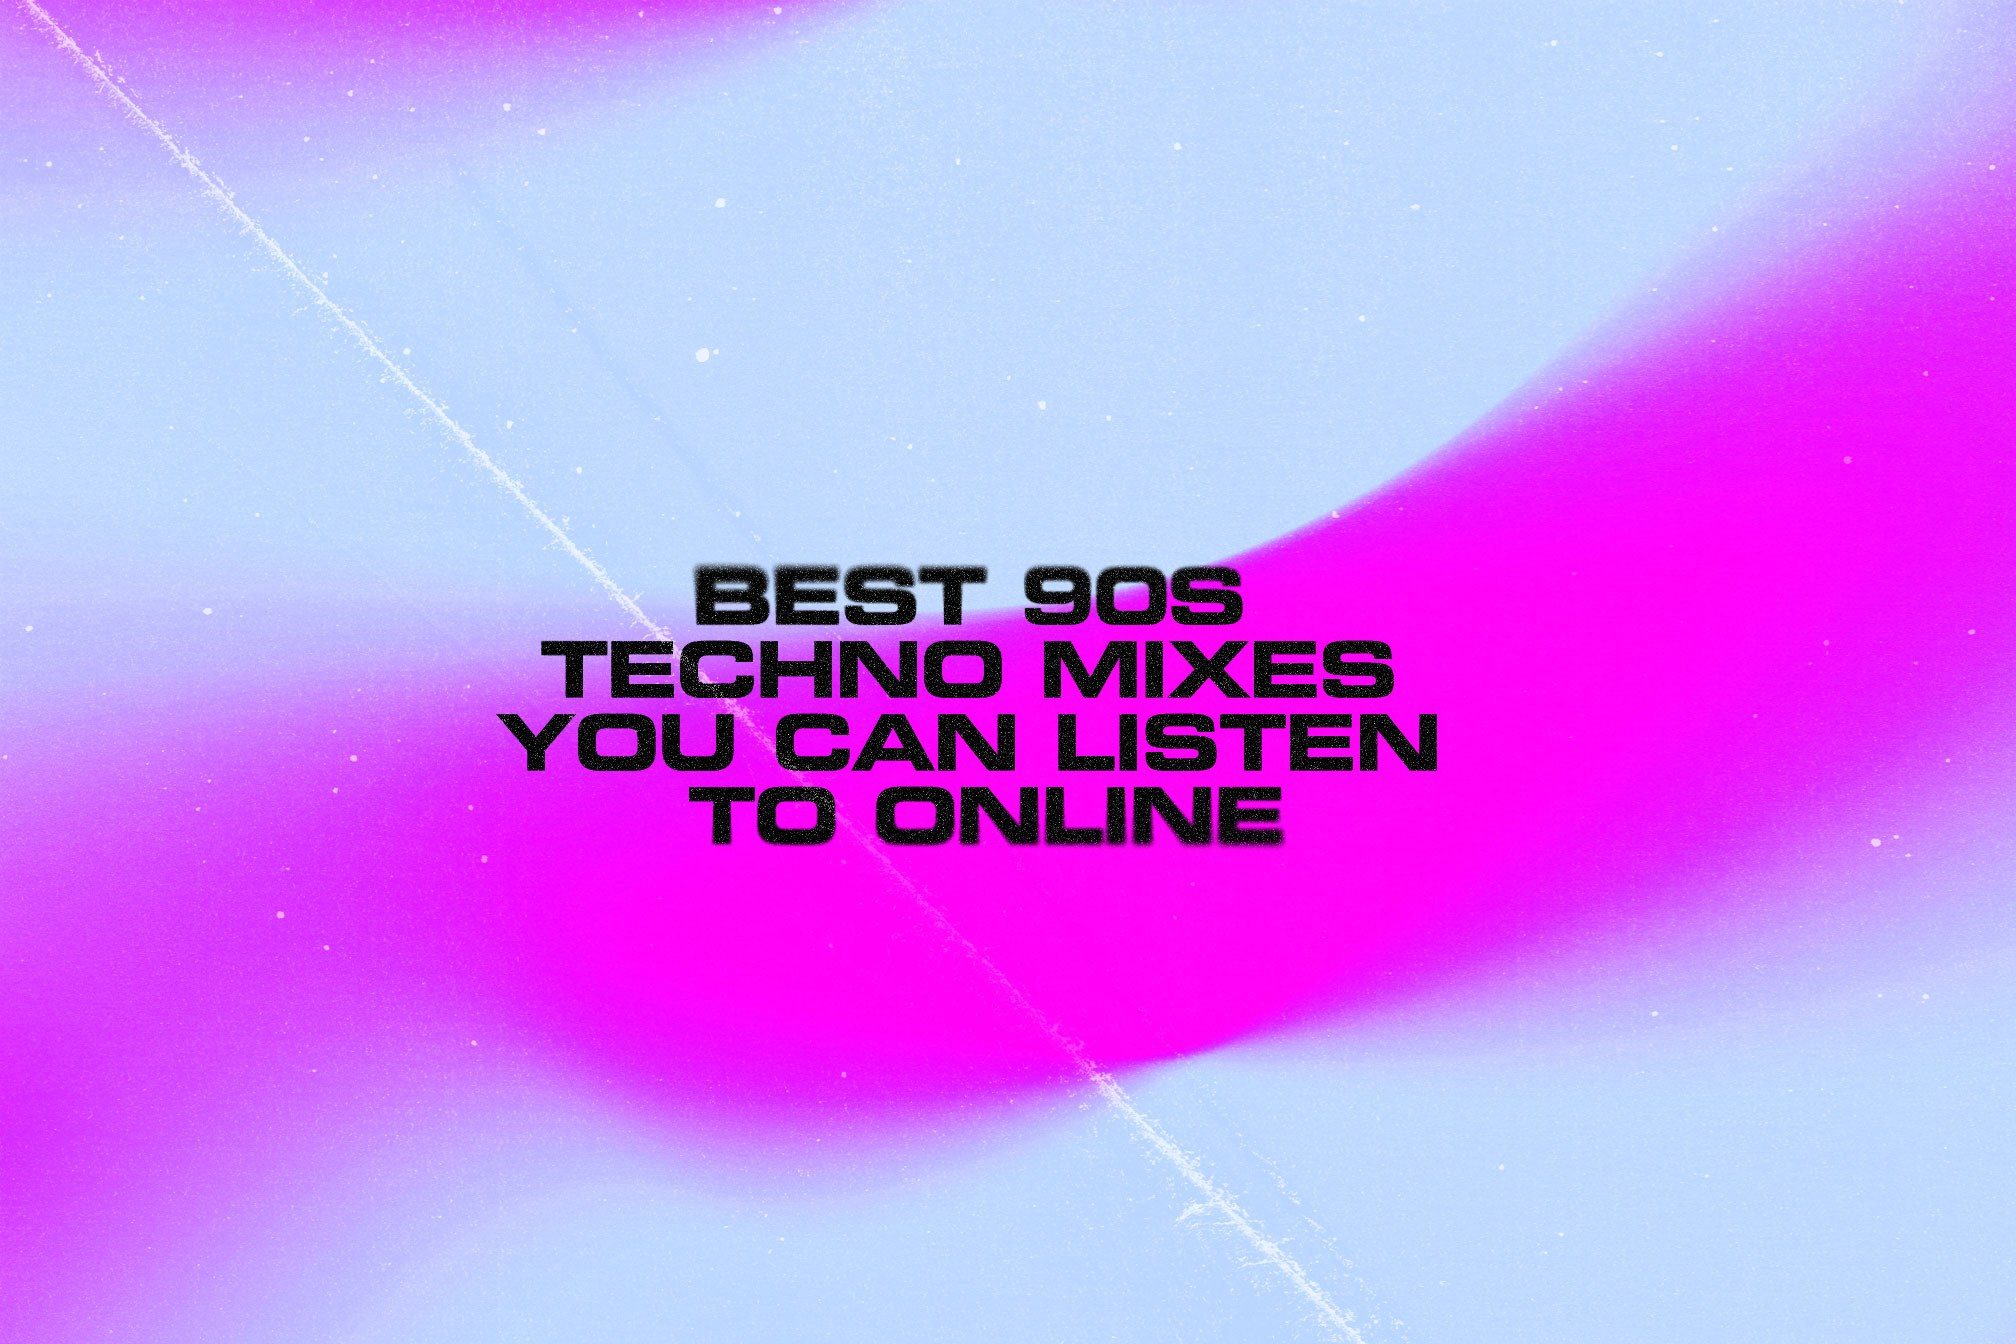 48 of the best 90s techno mixes you can listen to online